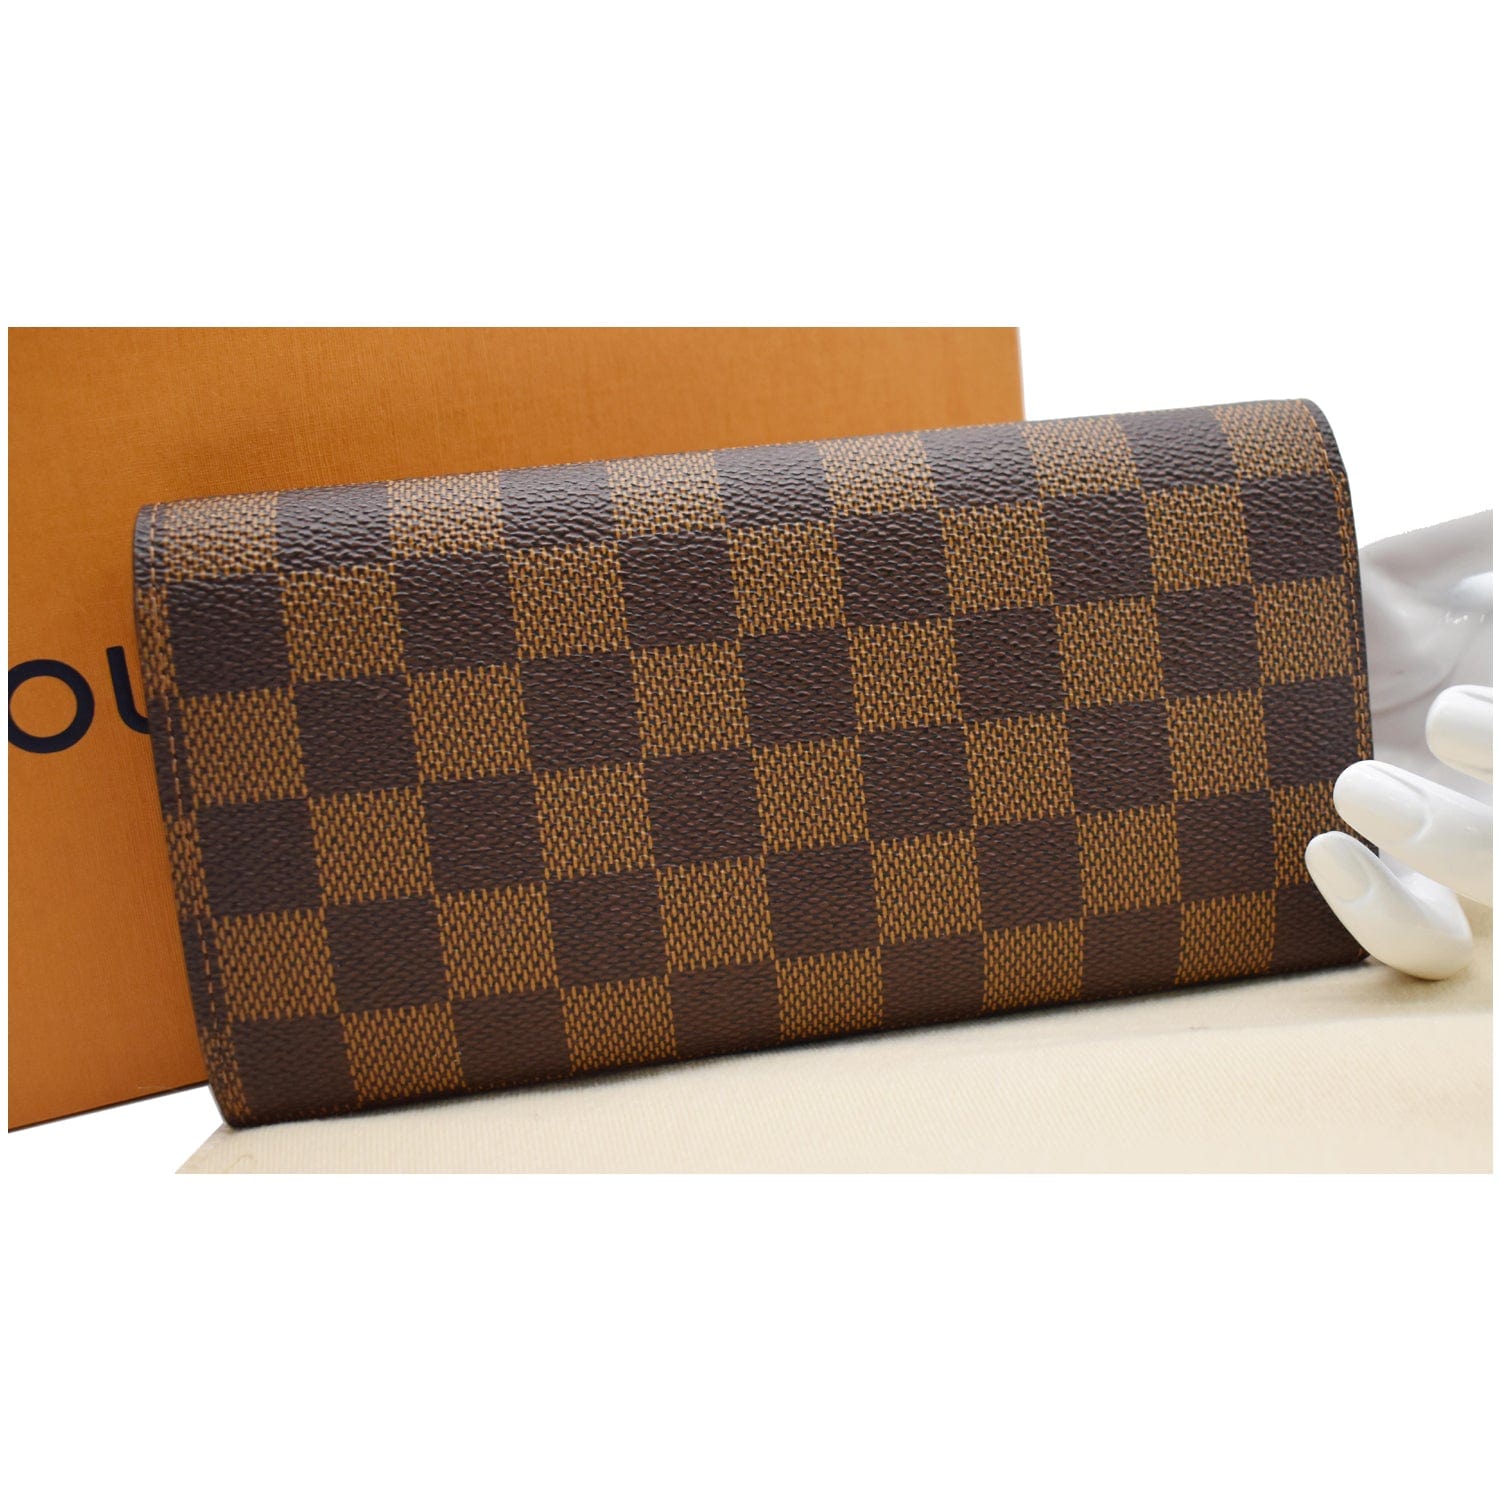 Louis Vuitton - Authenticated Emilie Wallet - Leather Brown Plain for Women, Very Good Condition